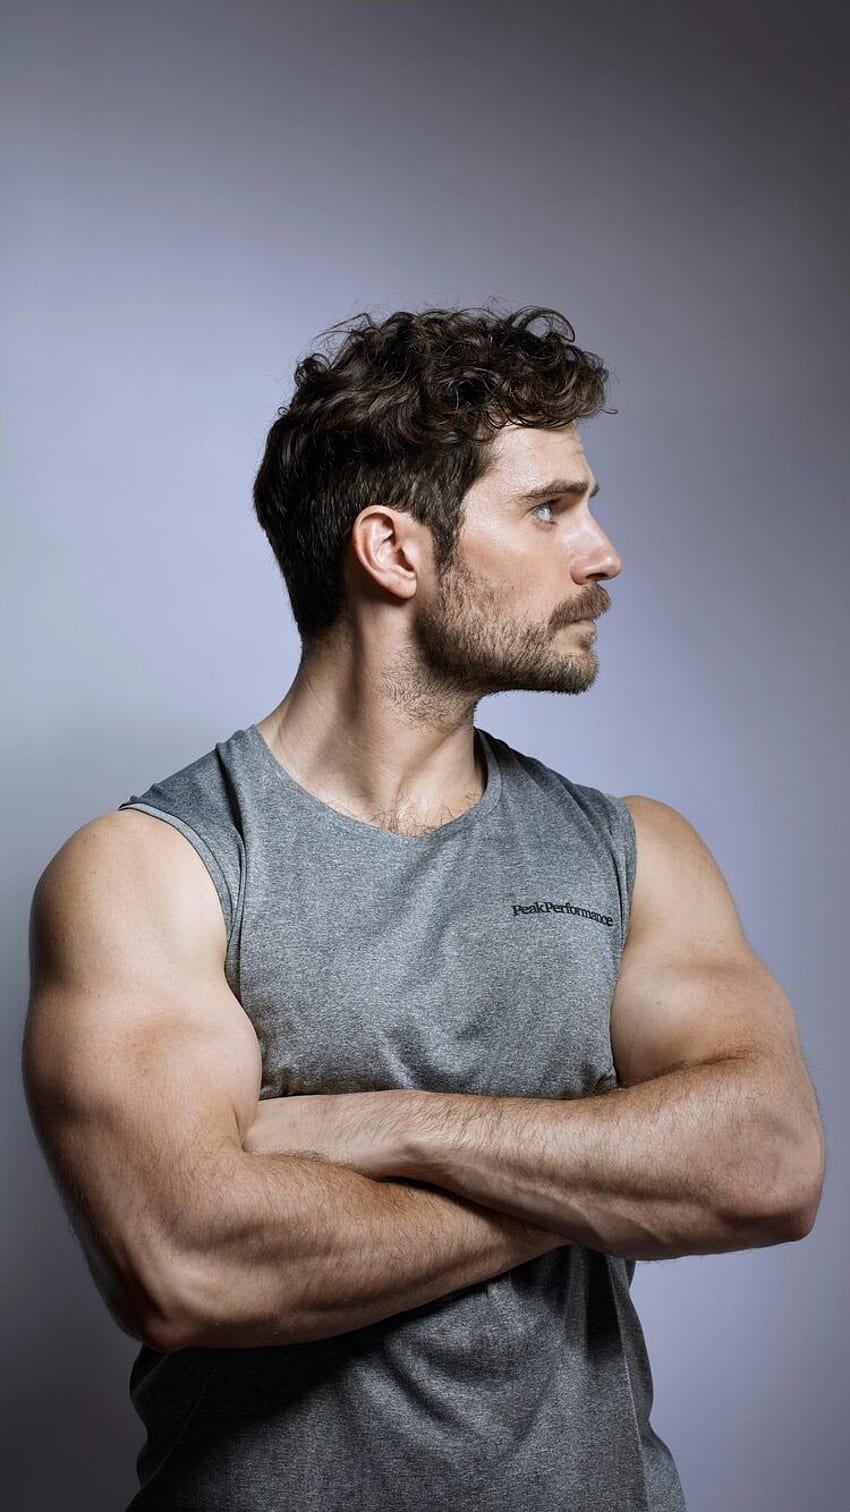 750x1334 Henry Cavill Time Magazine iPhone 6, iPhone 6S, iPhone 7, sfondi e corpo di henry cavill Sfondo del telefono HD